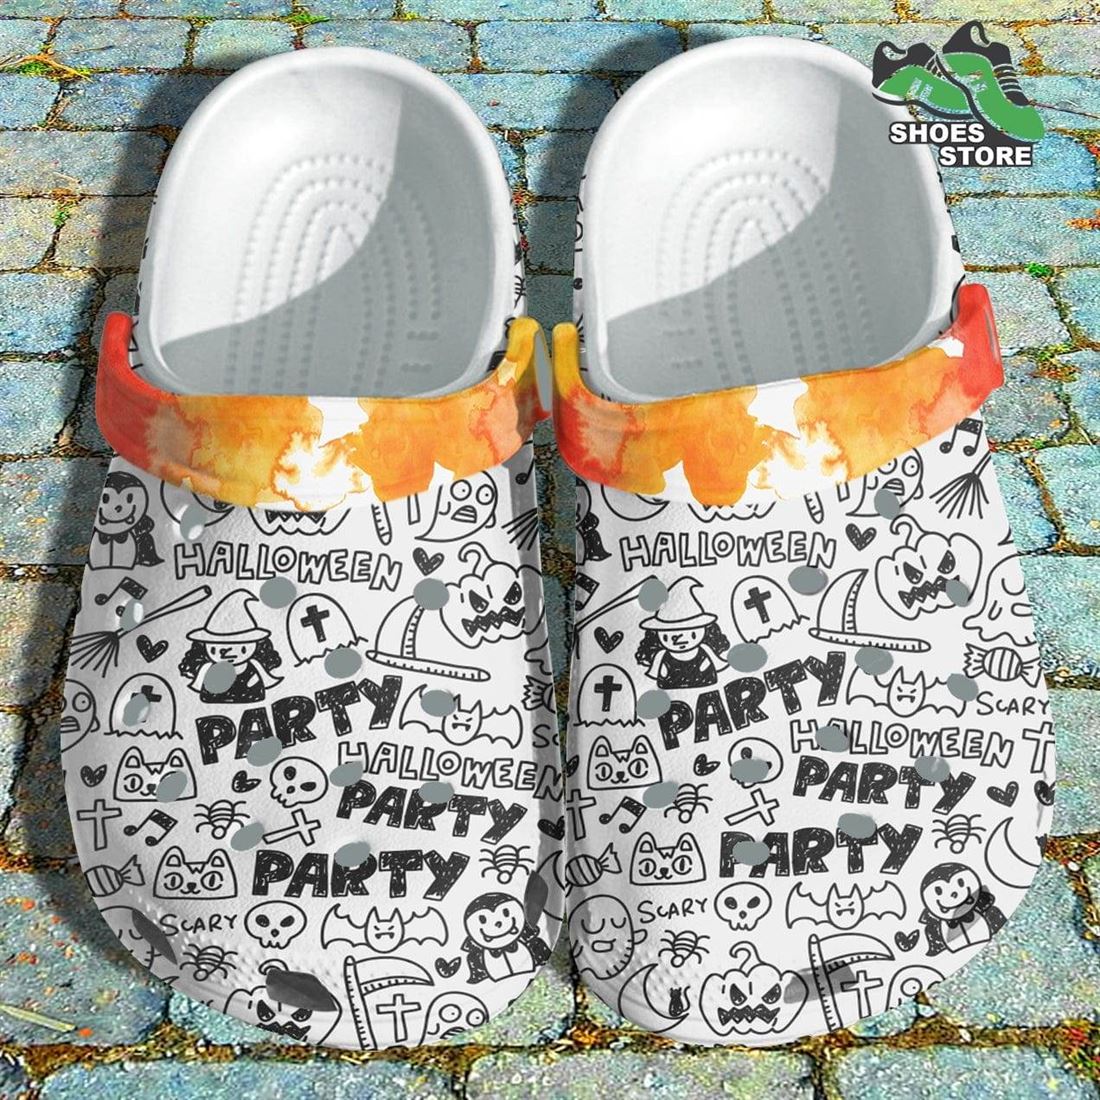 Halloween Party Sticker Witch Crocs Shoes Spooky Magazine Pattern Crocs Shoes Christmas